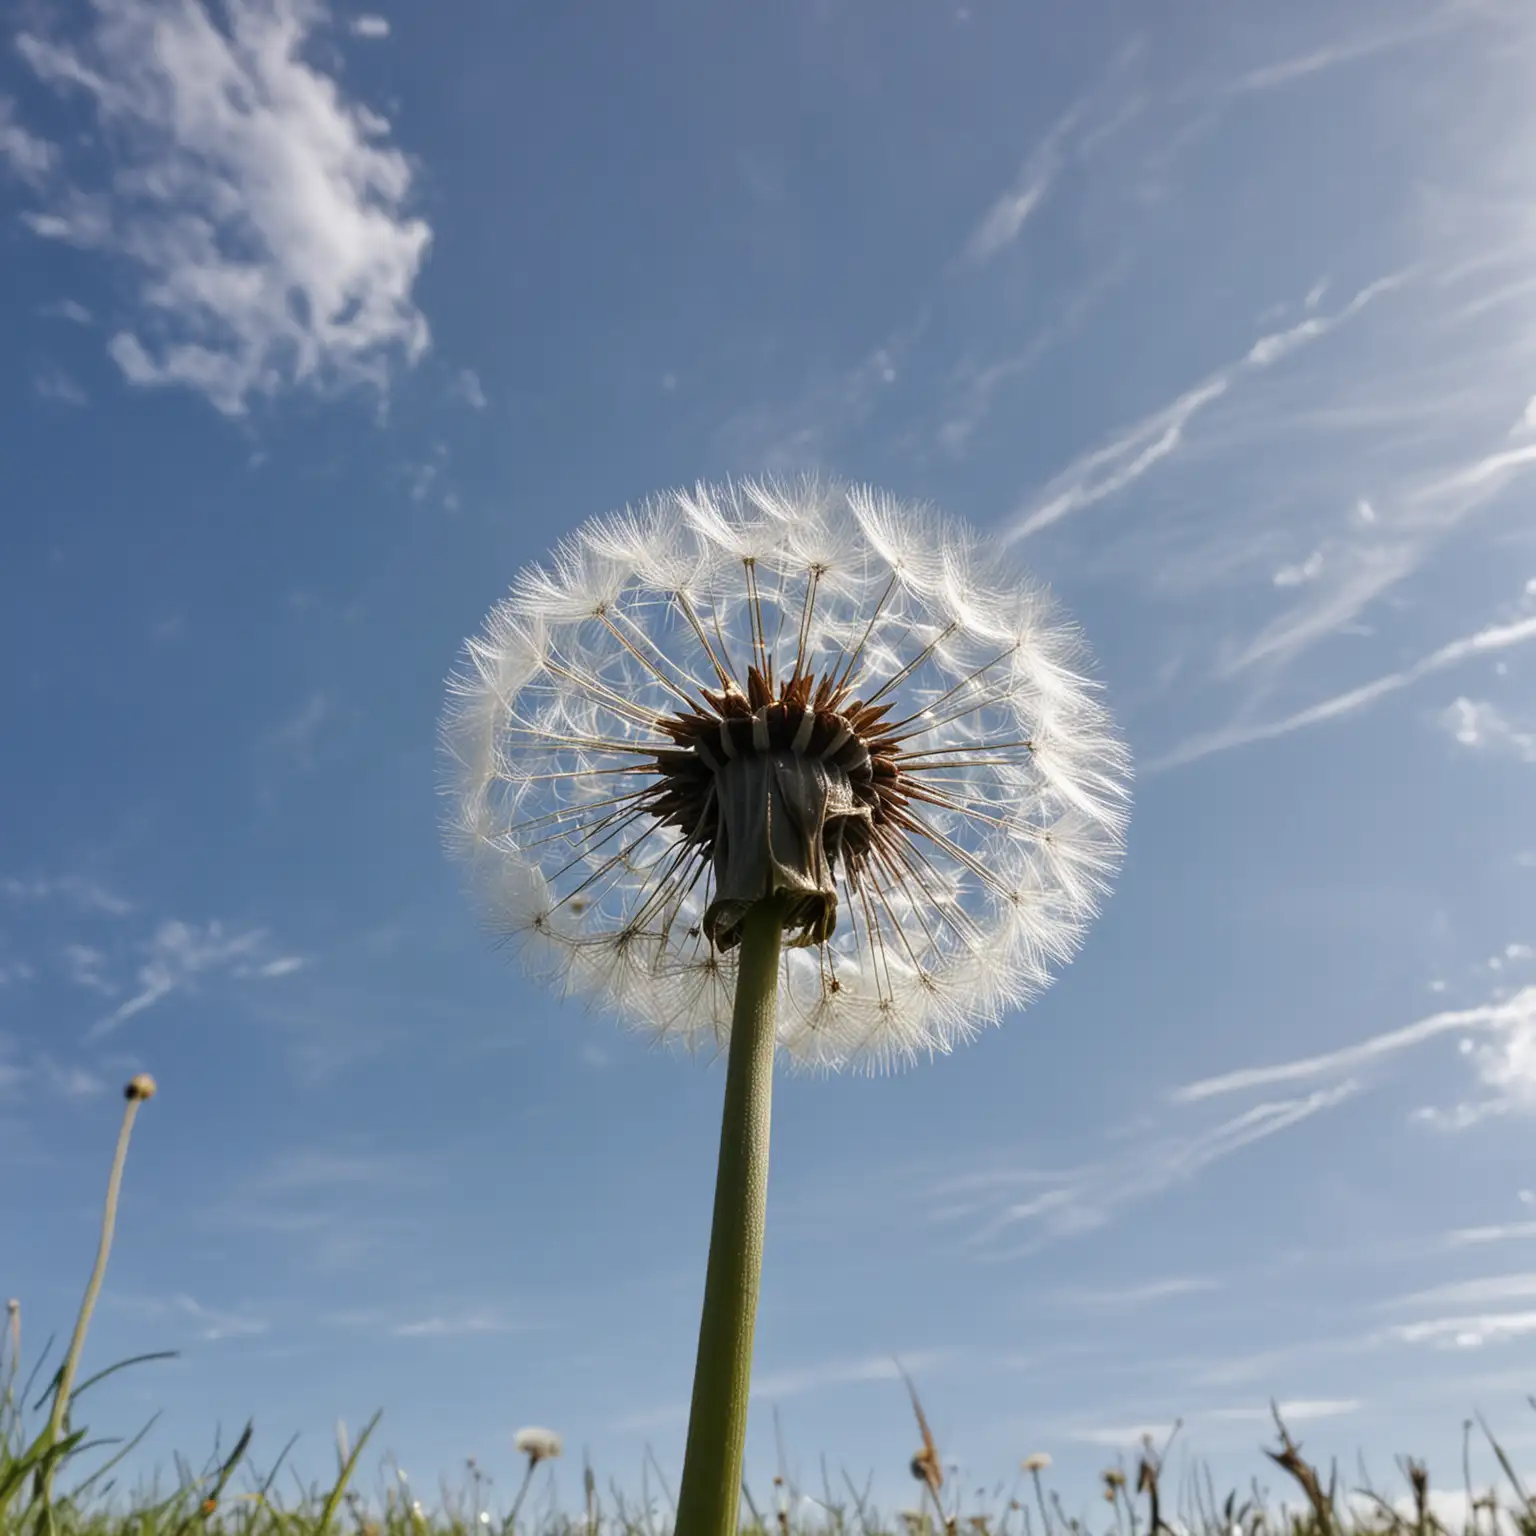 Gazing at Partially Cloudy Sky through Puffy Dandelion from Grass